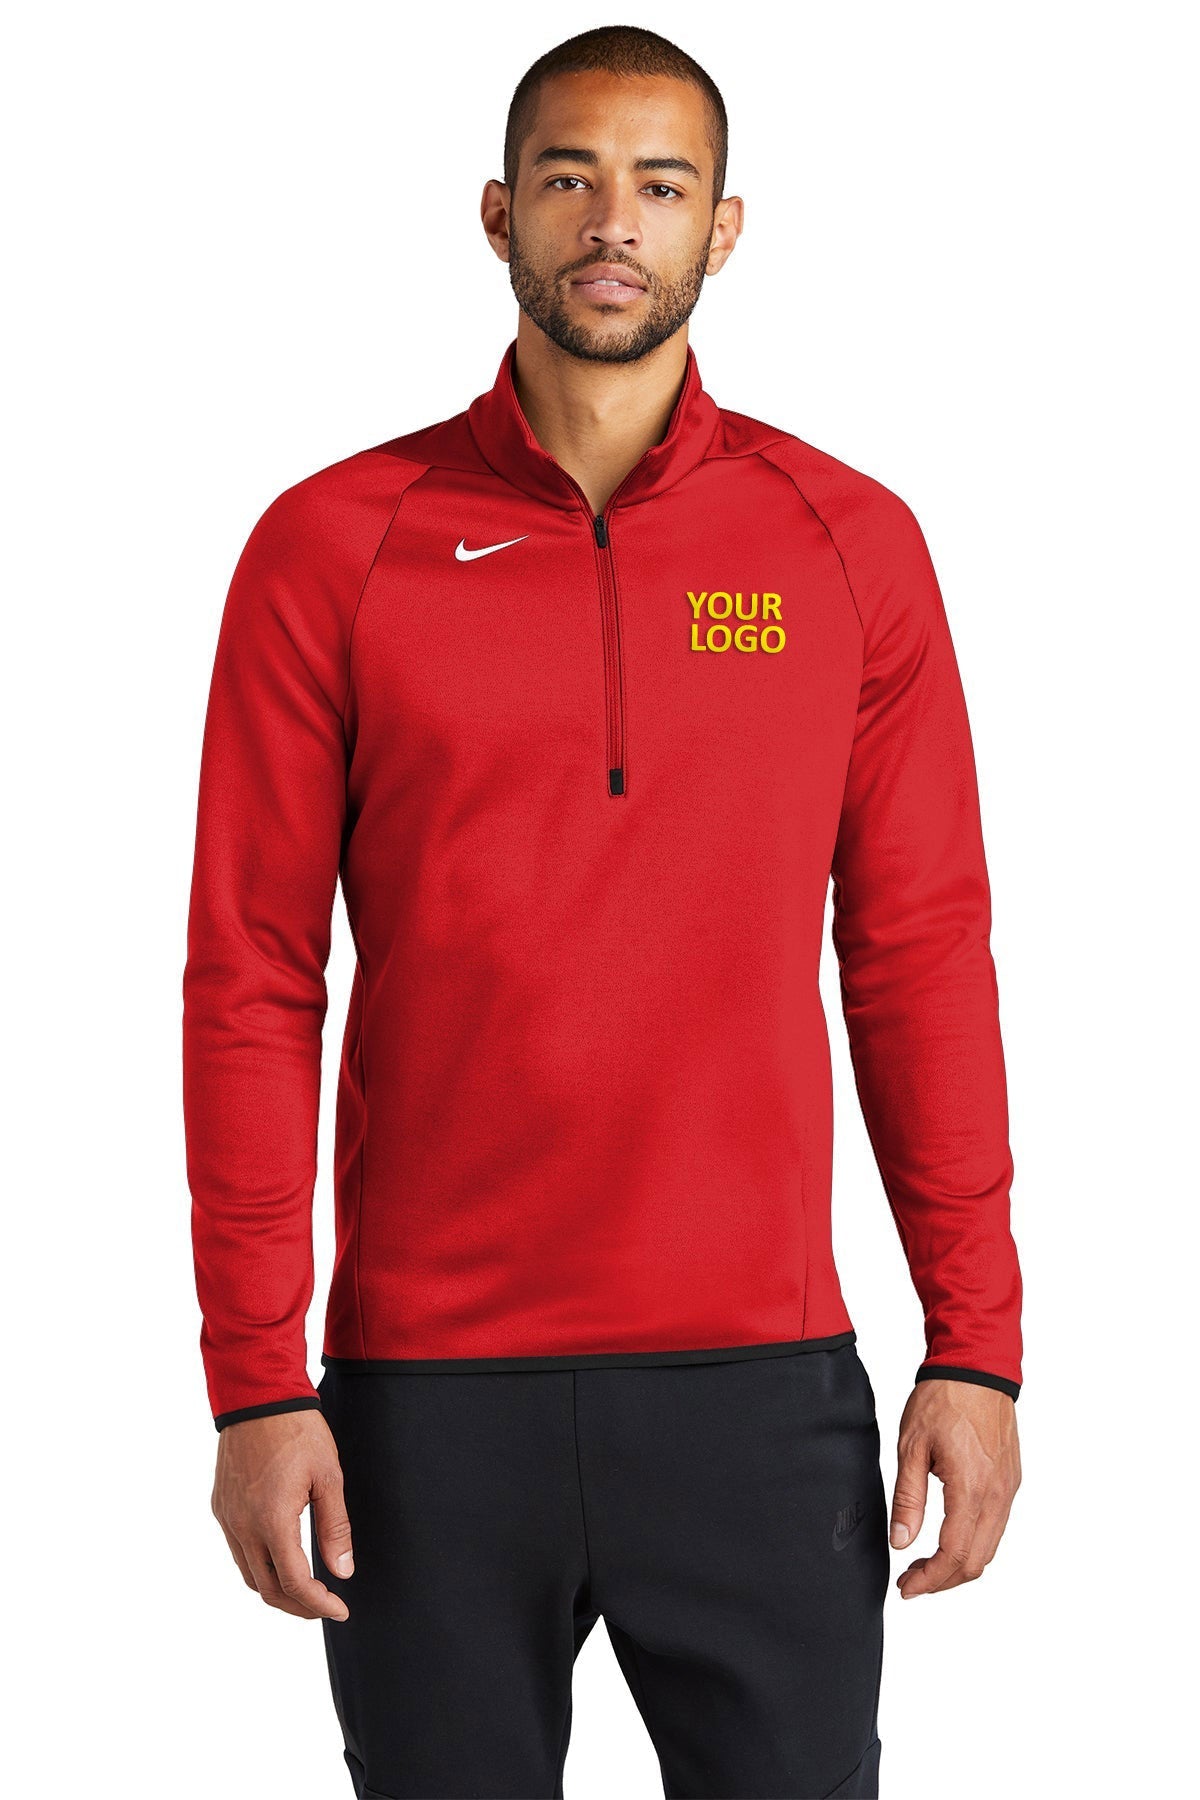 Nike Team Scarlet CN9492 company embroidered jackets